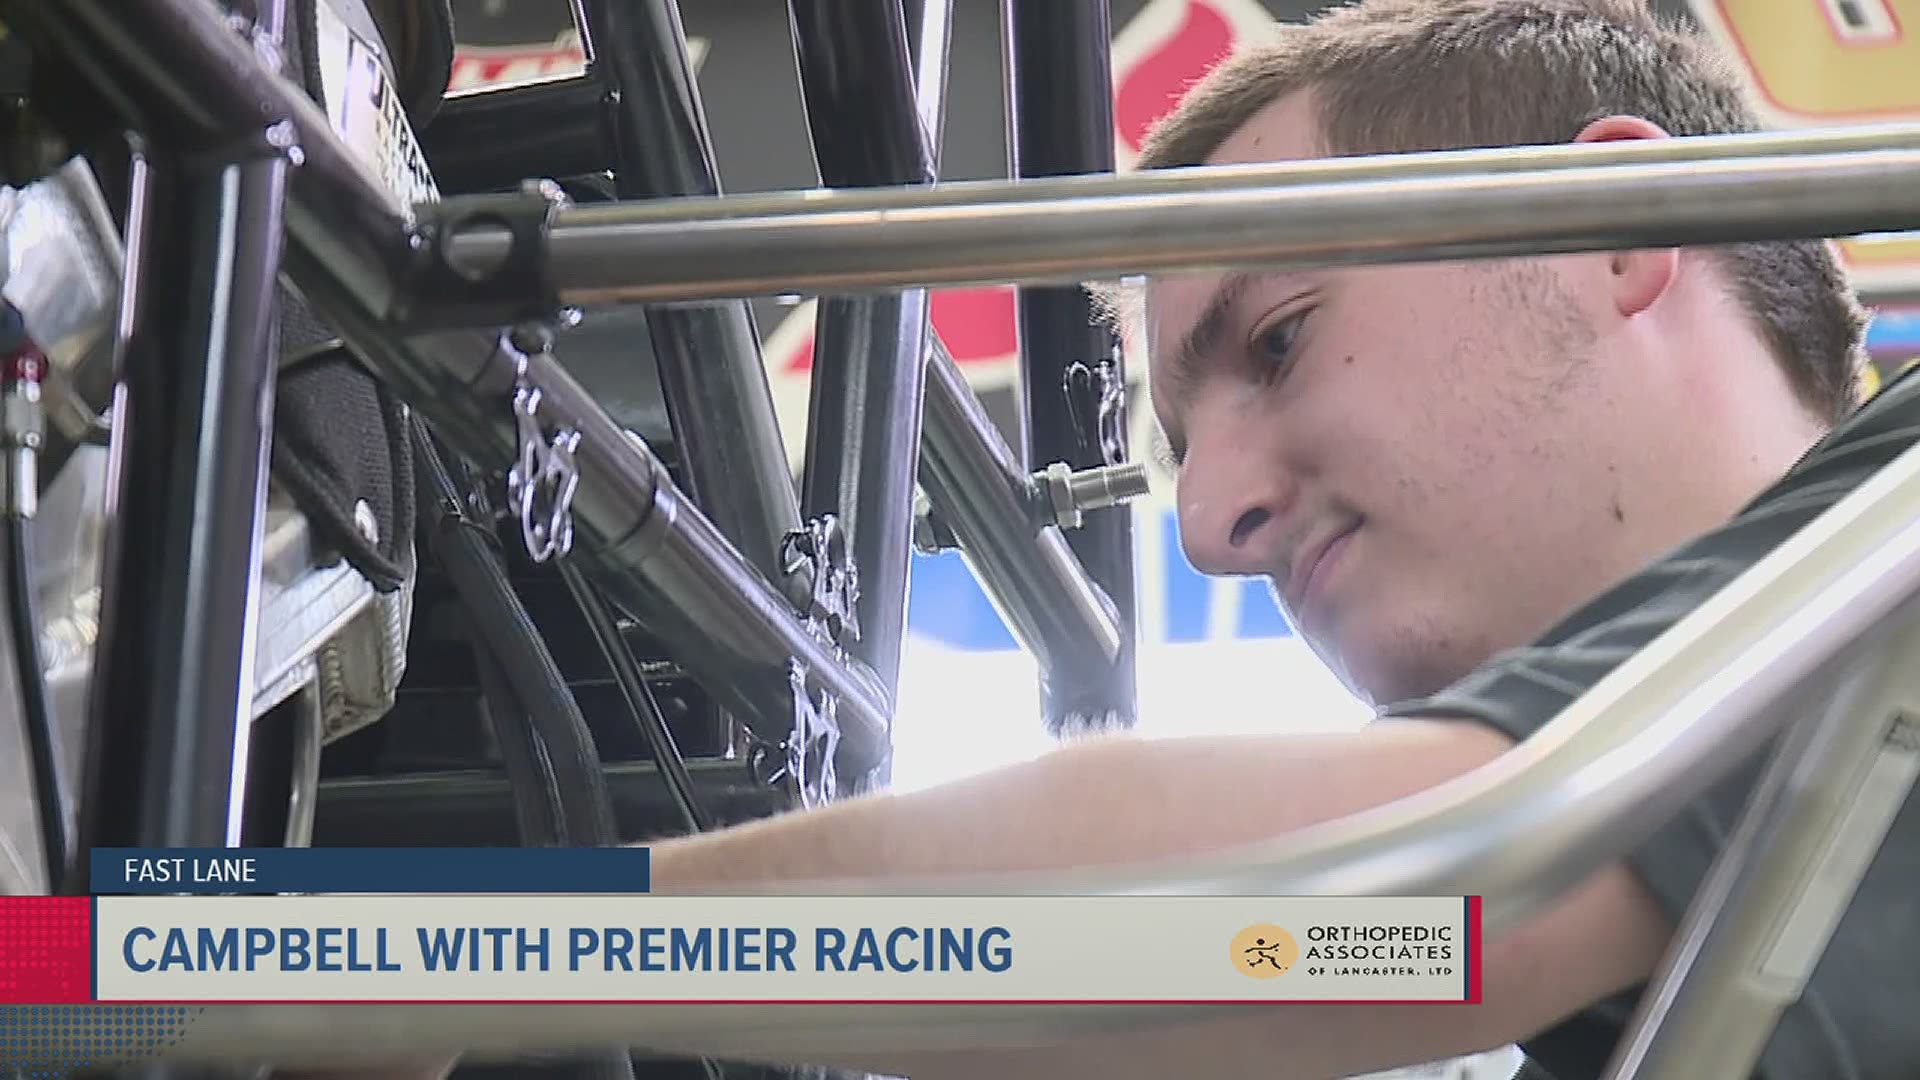 For the first time in 17 years, Premier Racing has a different driver.